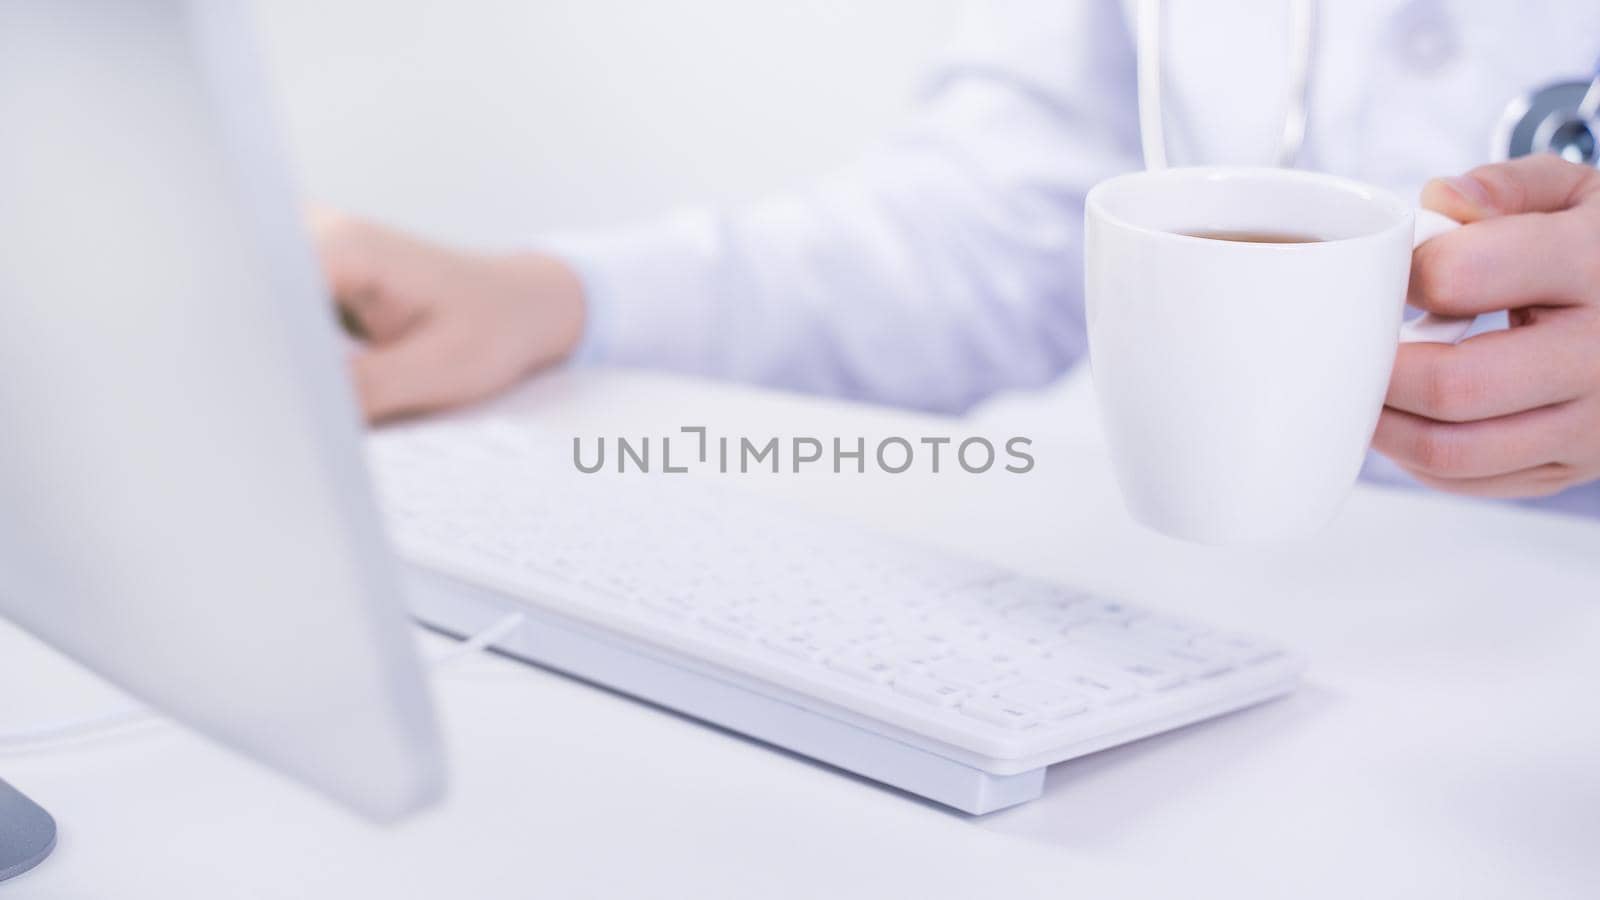 Business concept - Young female doctor woman working at office with computer, typing electronic medical record, white table background, close up, copy space by ROMIXIMAGE